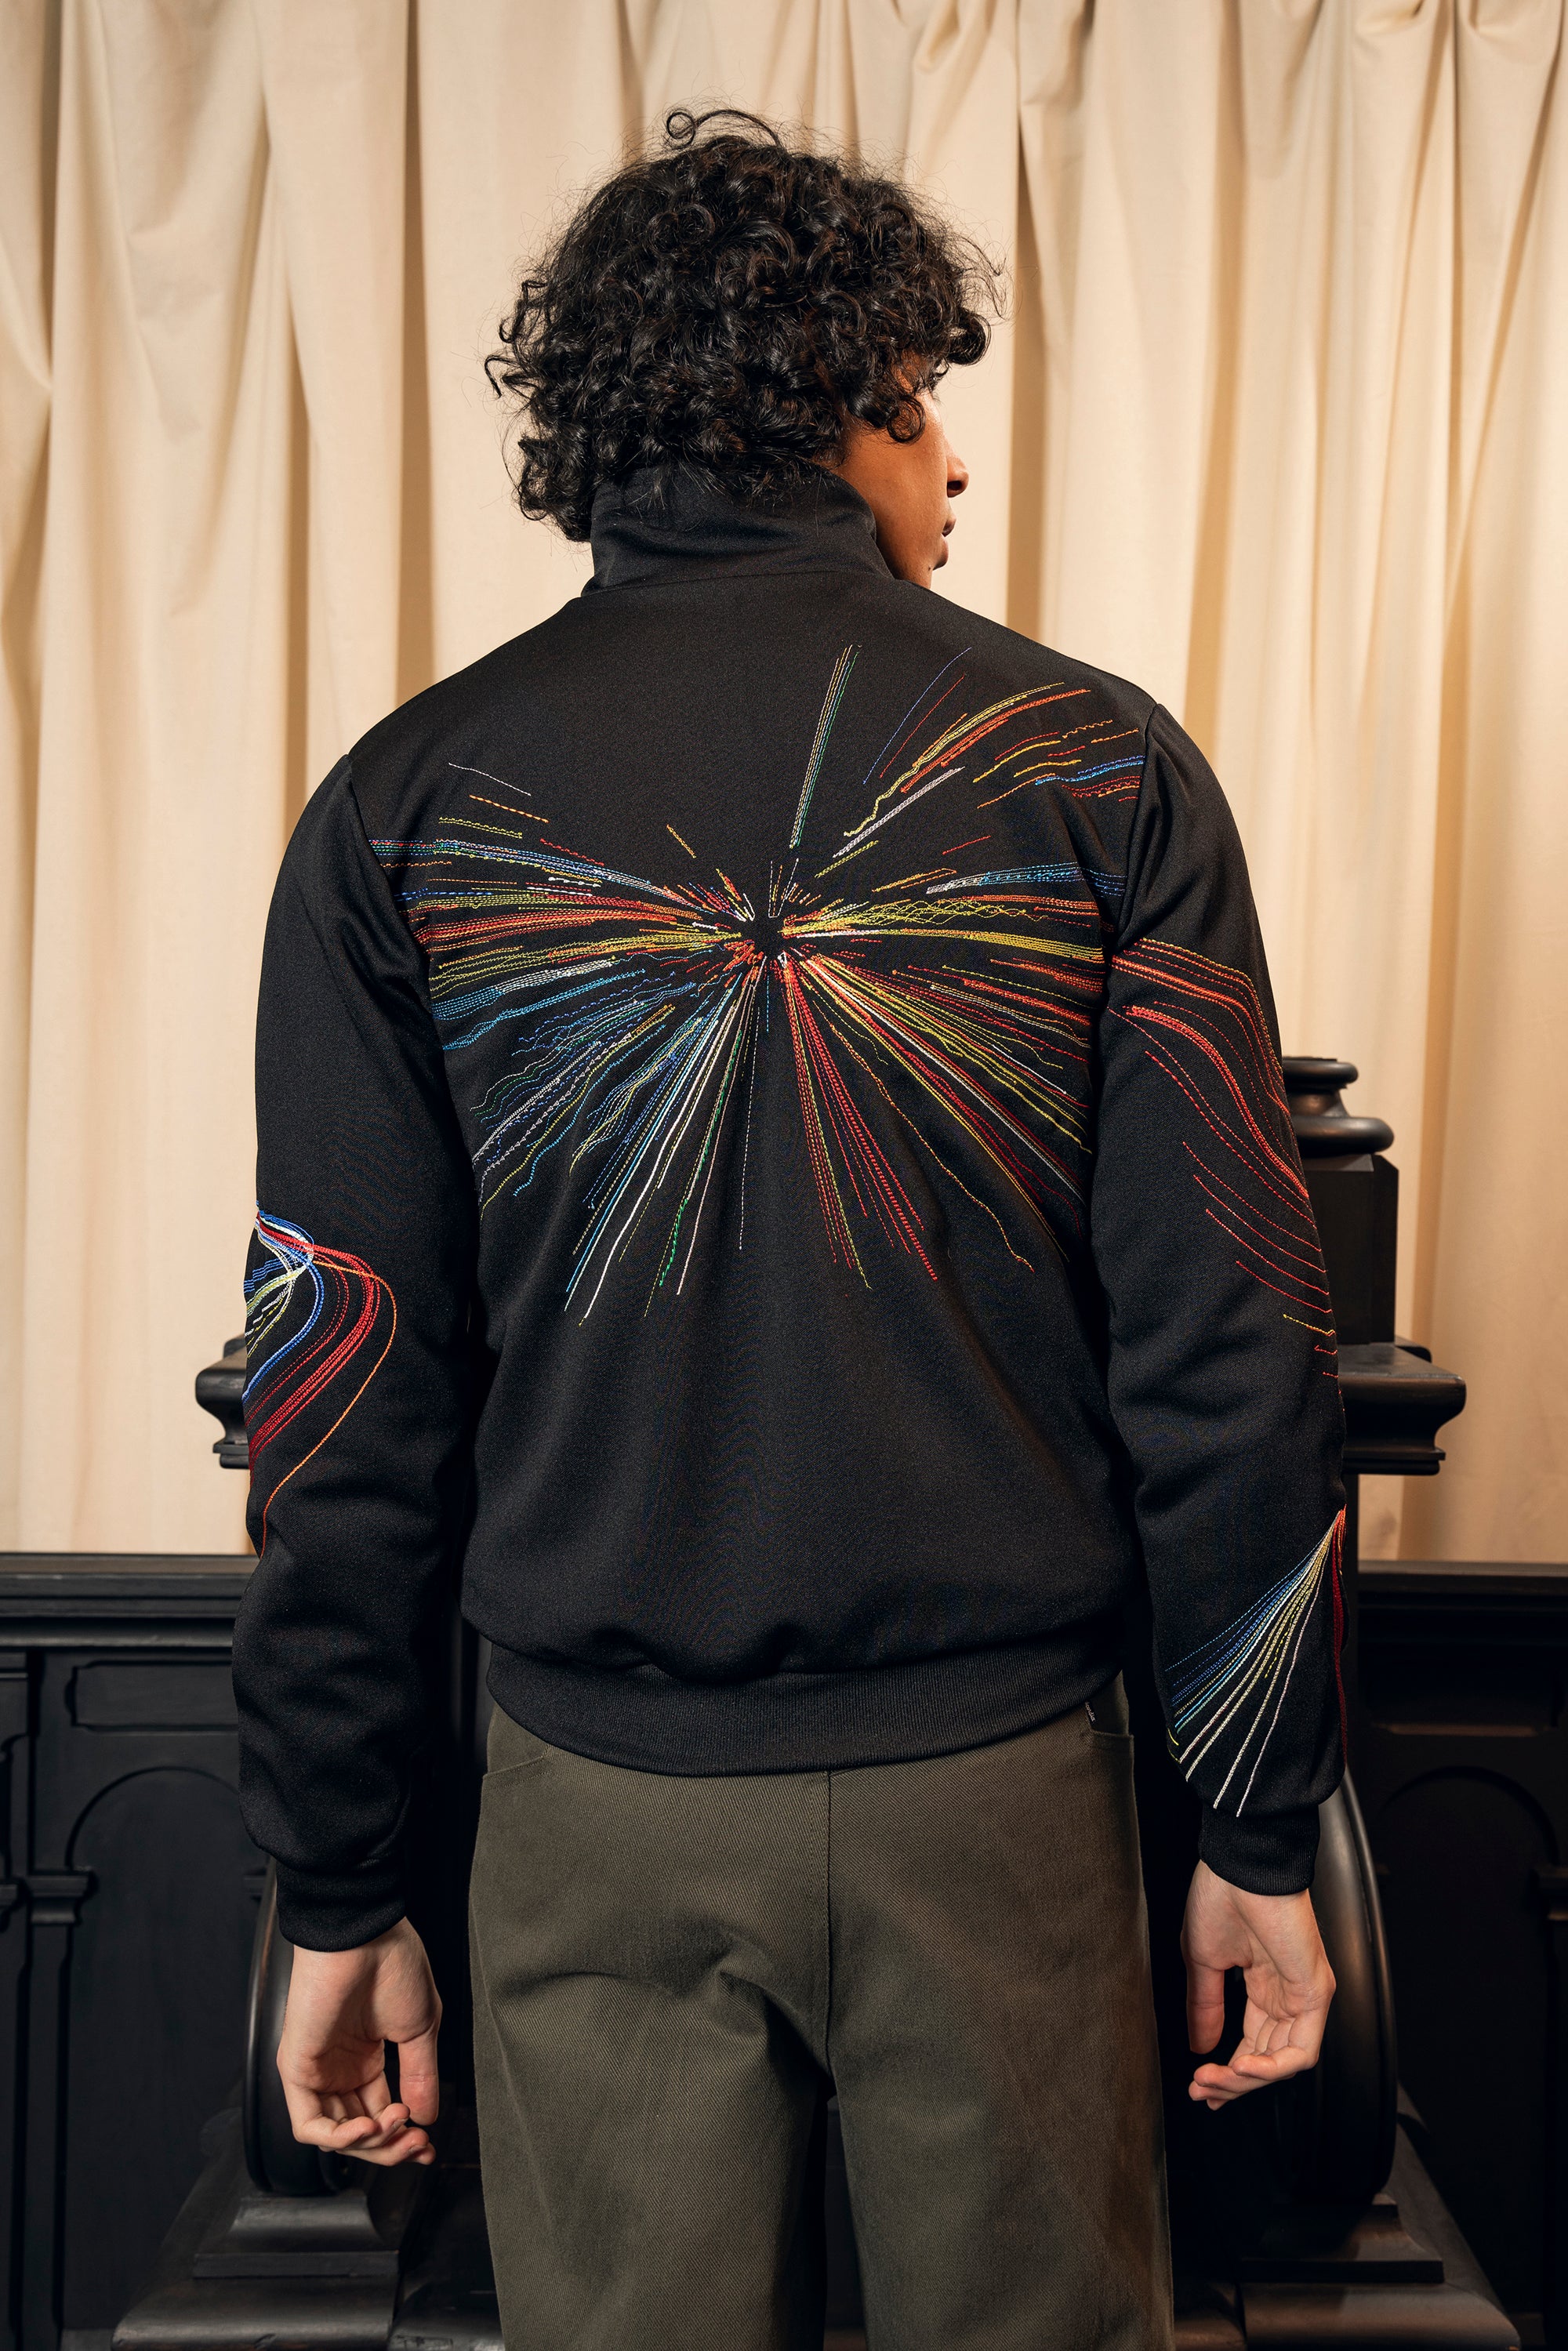 men's sports jacket heritage urban sportswear chic casual black artisanal embroidery colorful graphic design